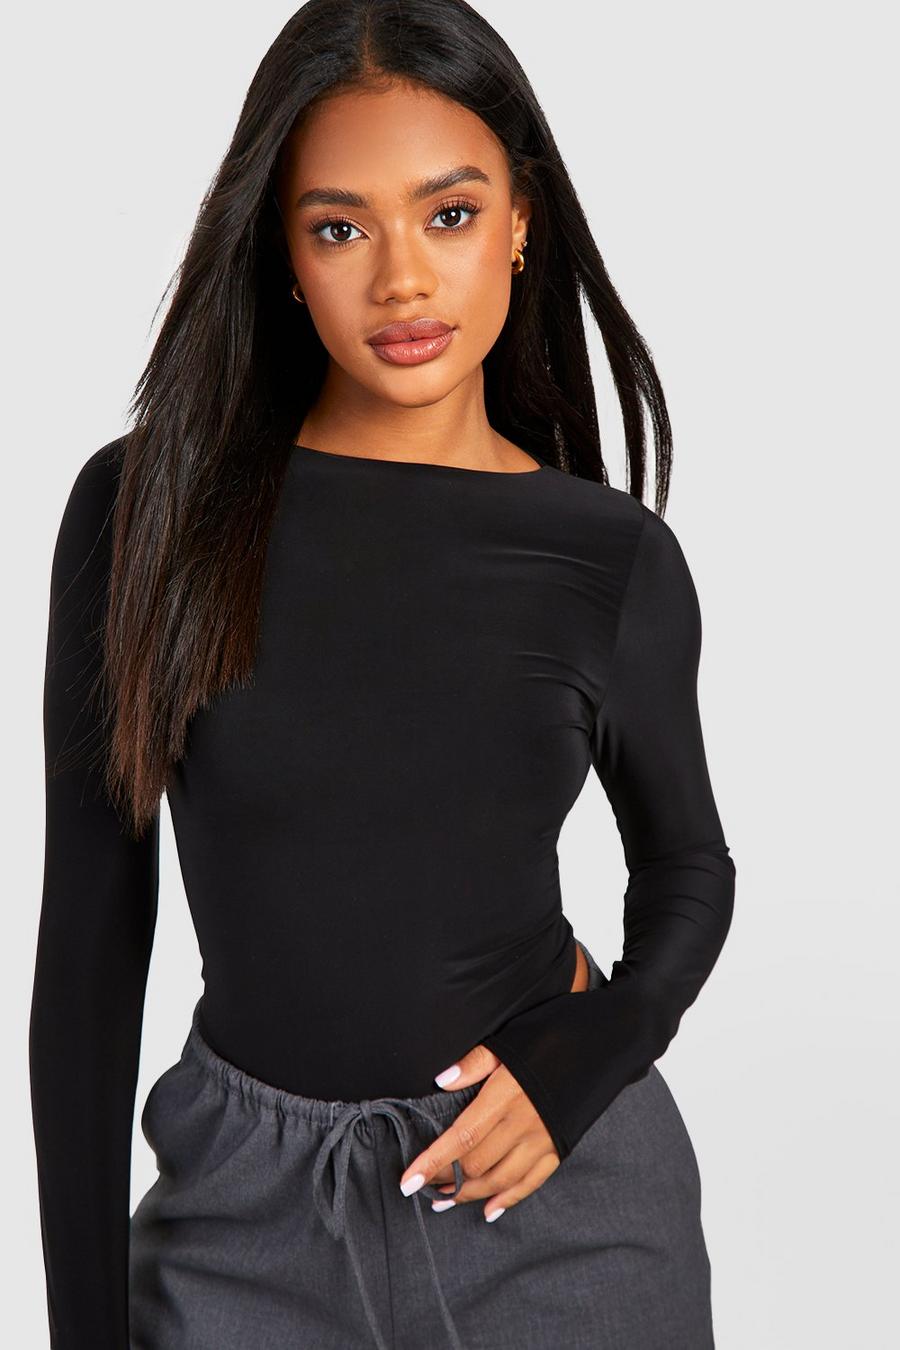 Women's Going Out Tops - Party Tops